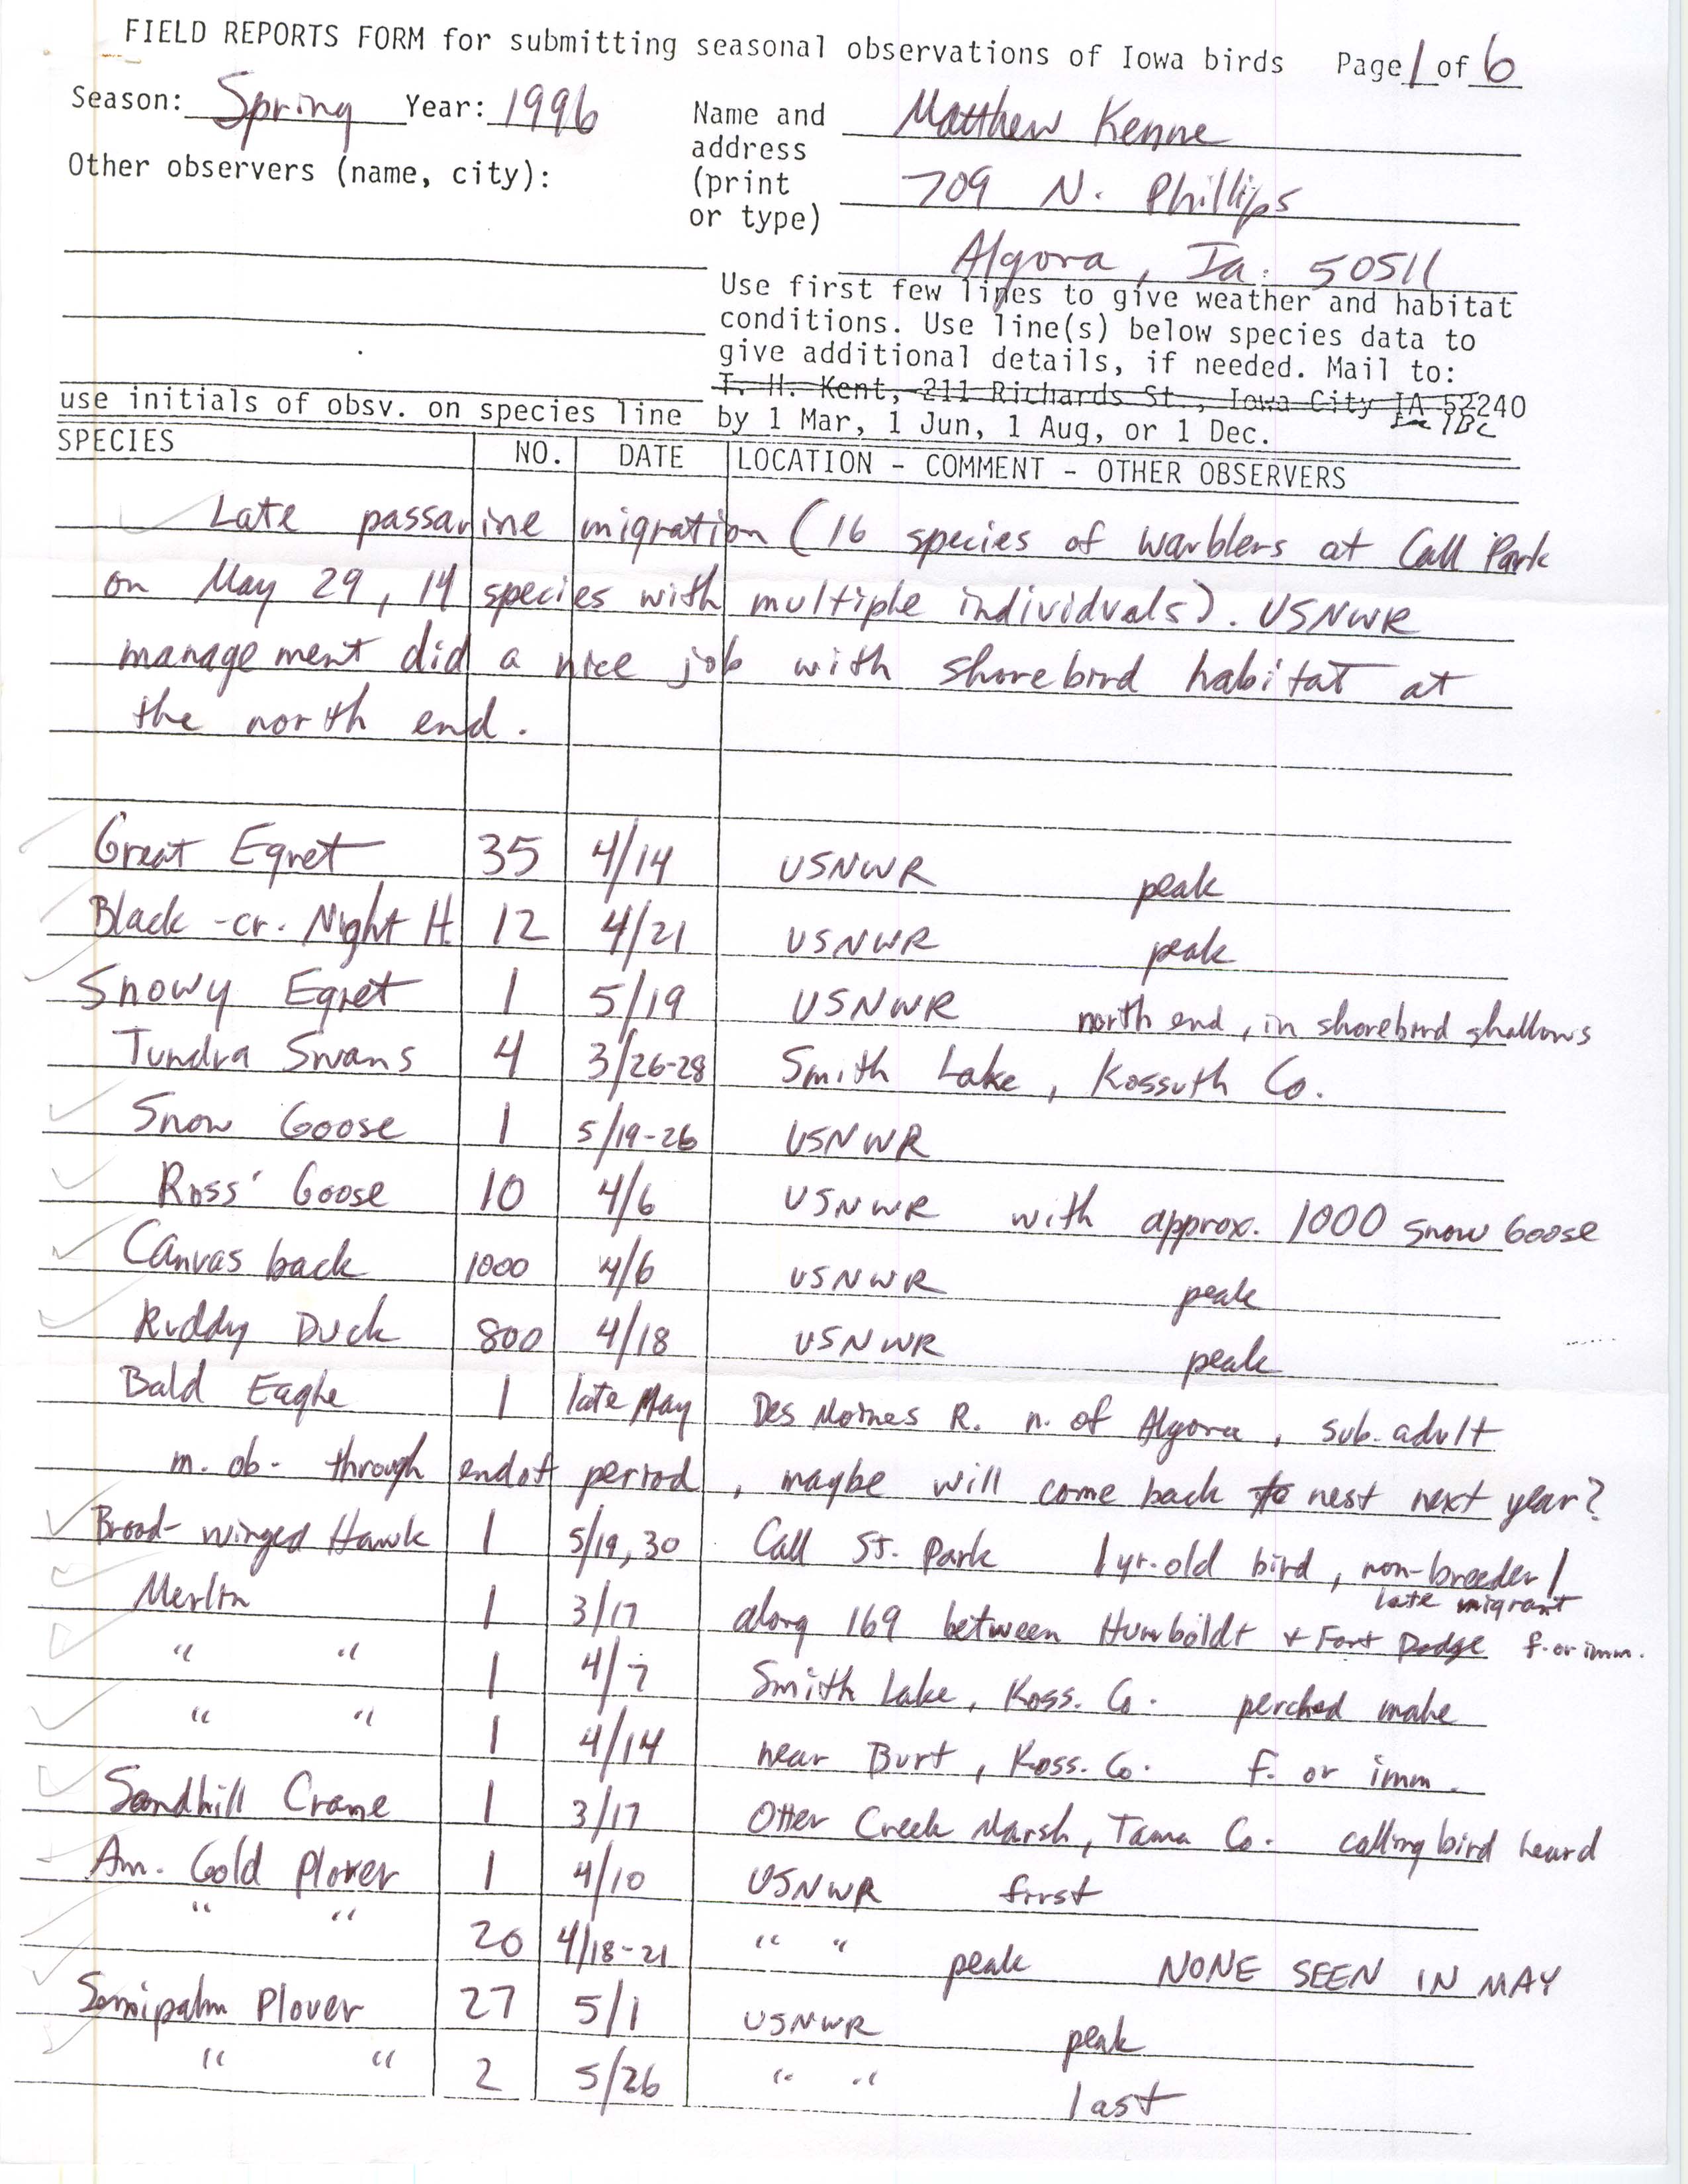 Field reports form for submitting seasonal observations of Iowa birds, Matthew Kenne, spring 1996